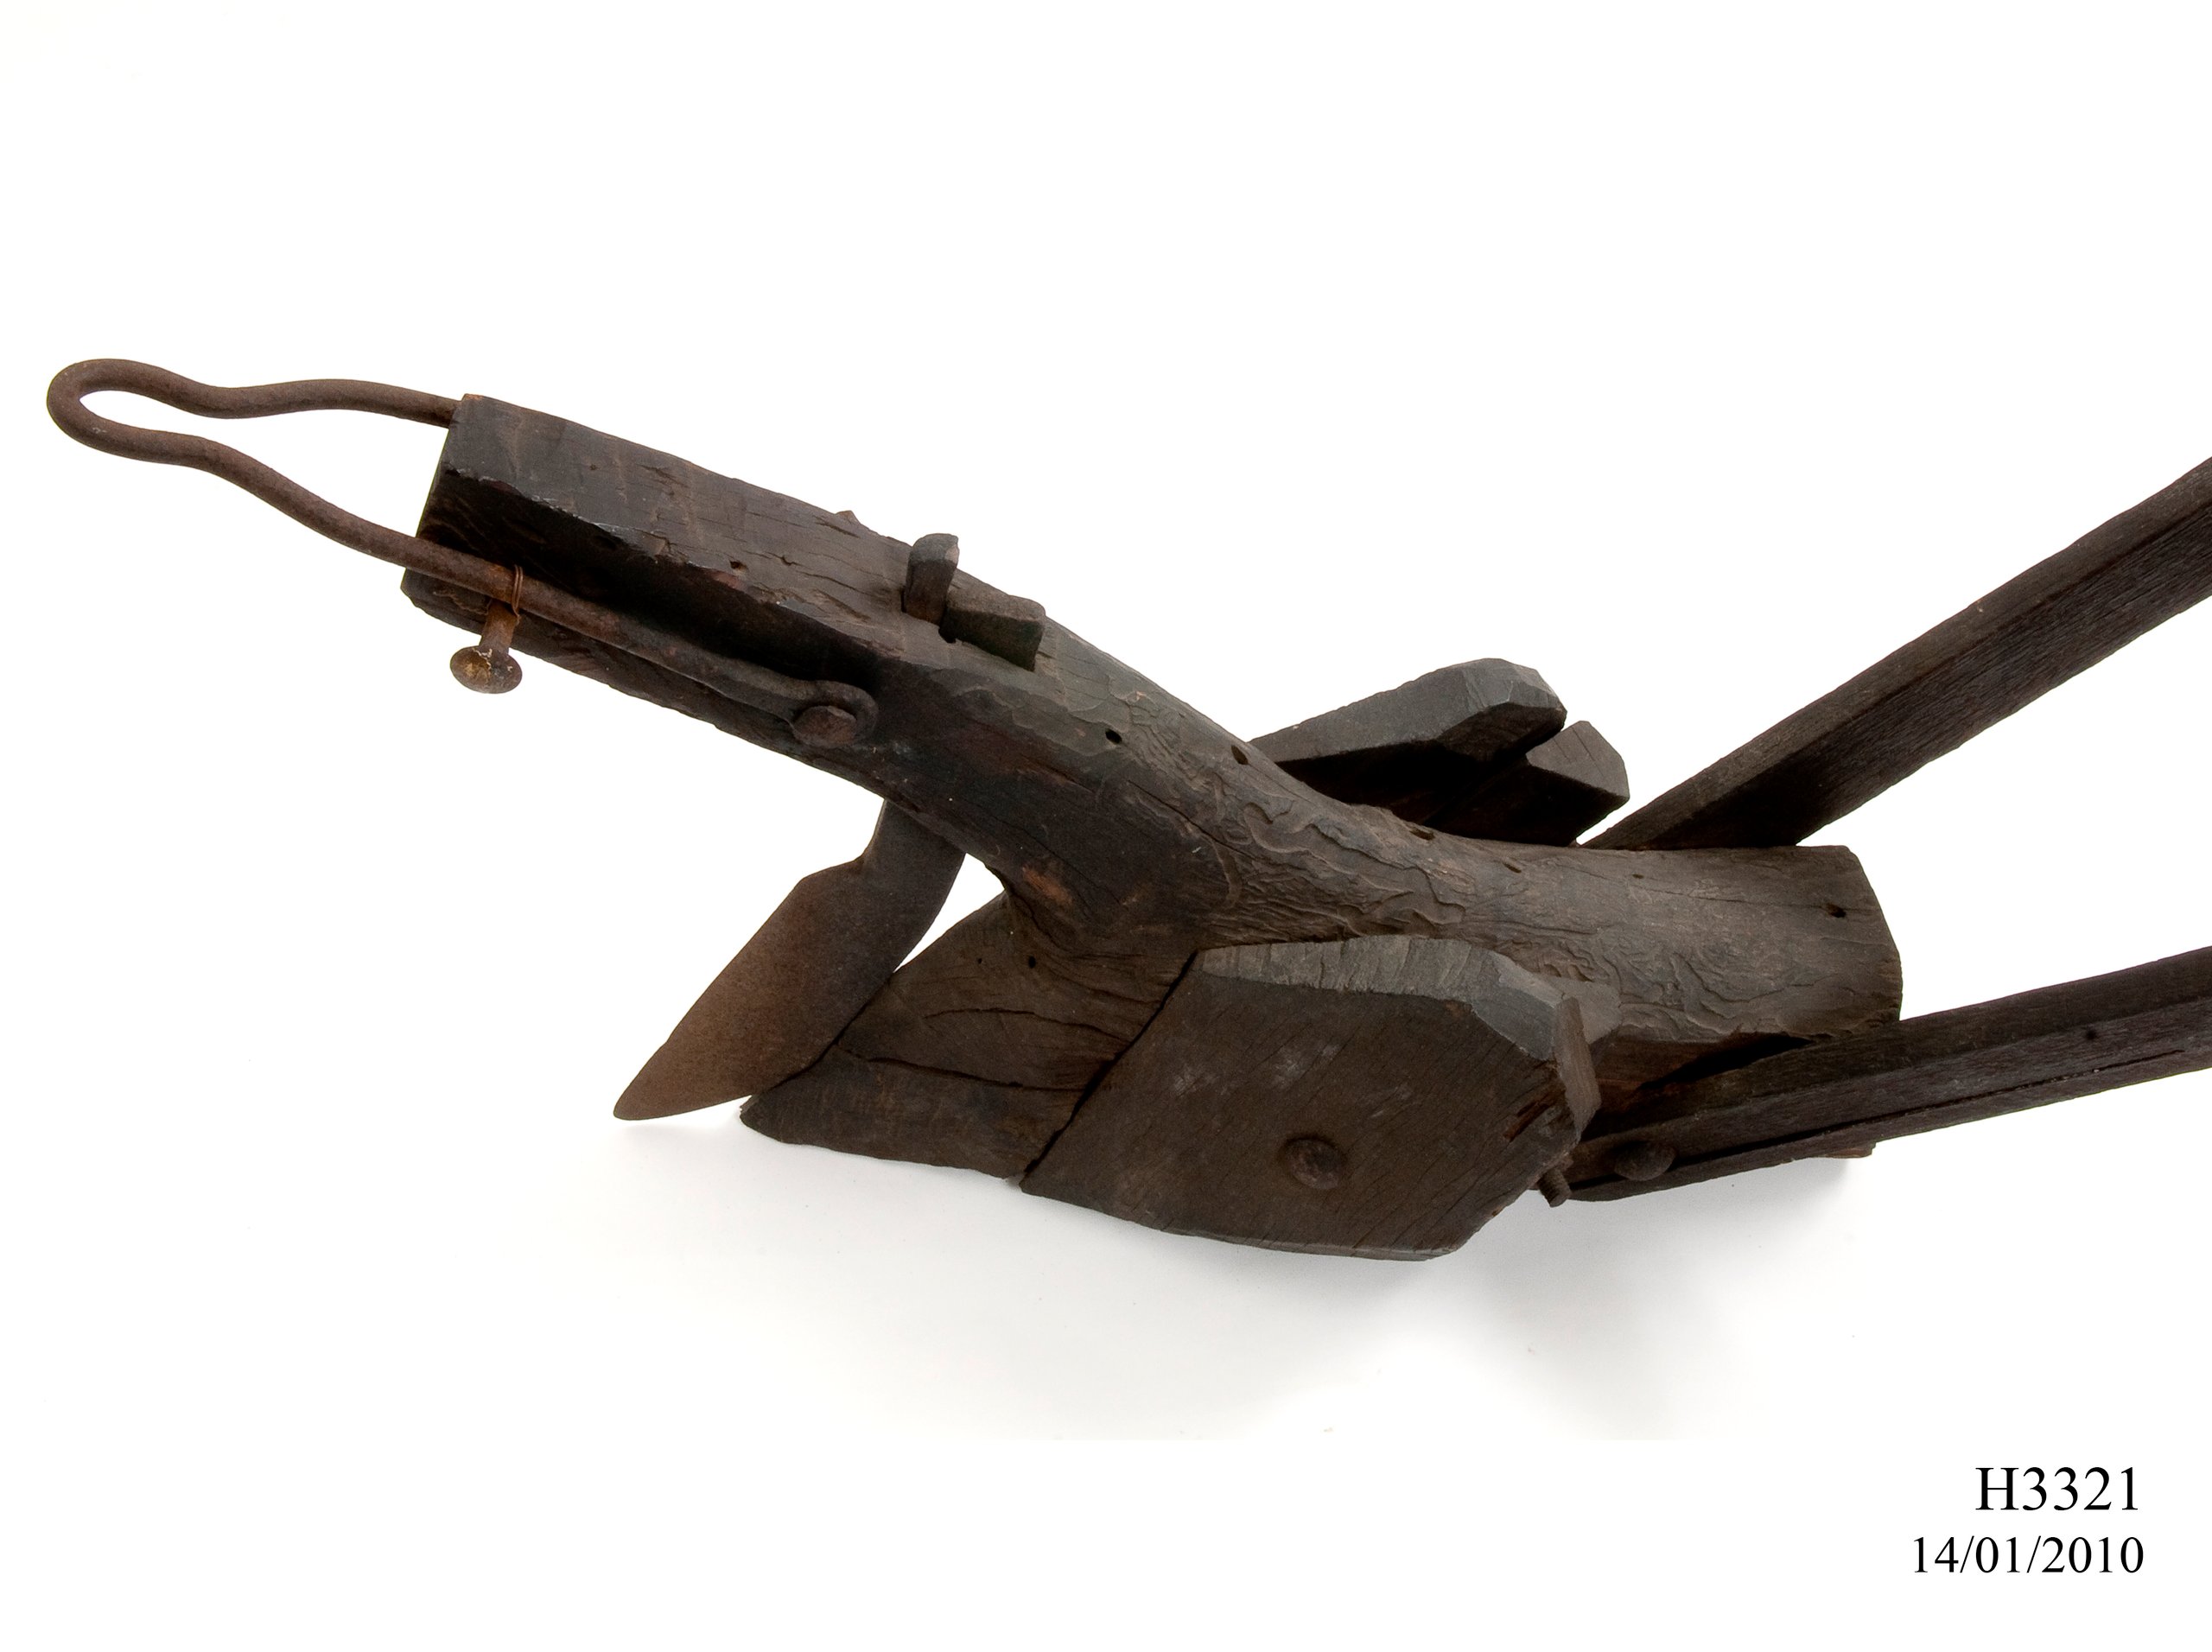 Mouldboard plough attributed to James Ruse